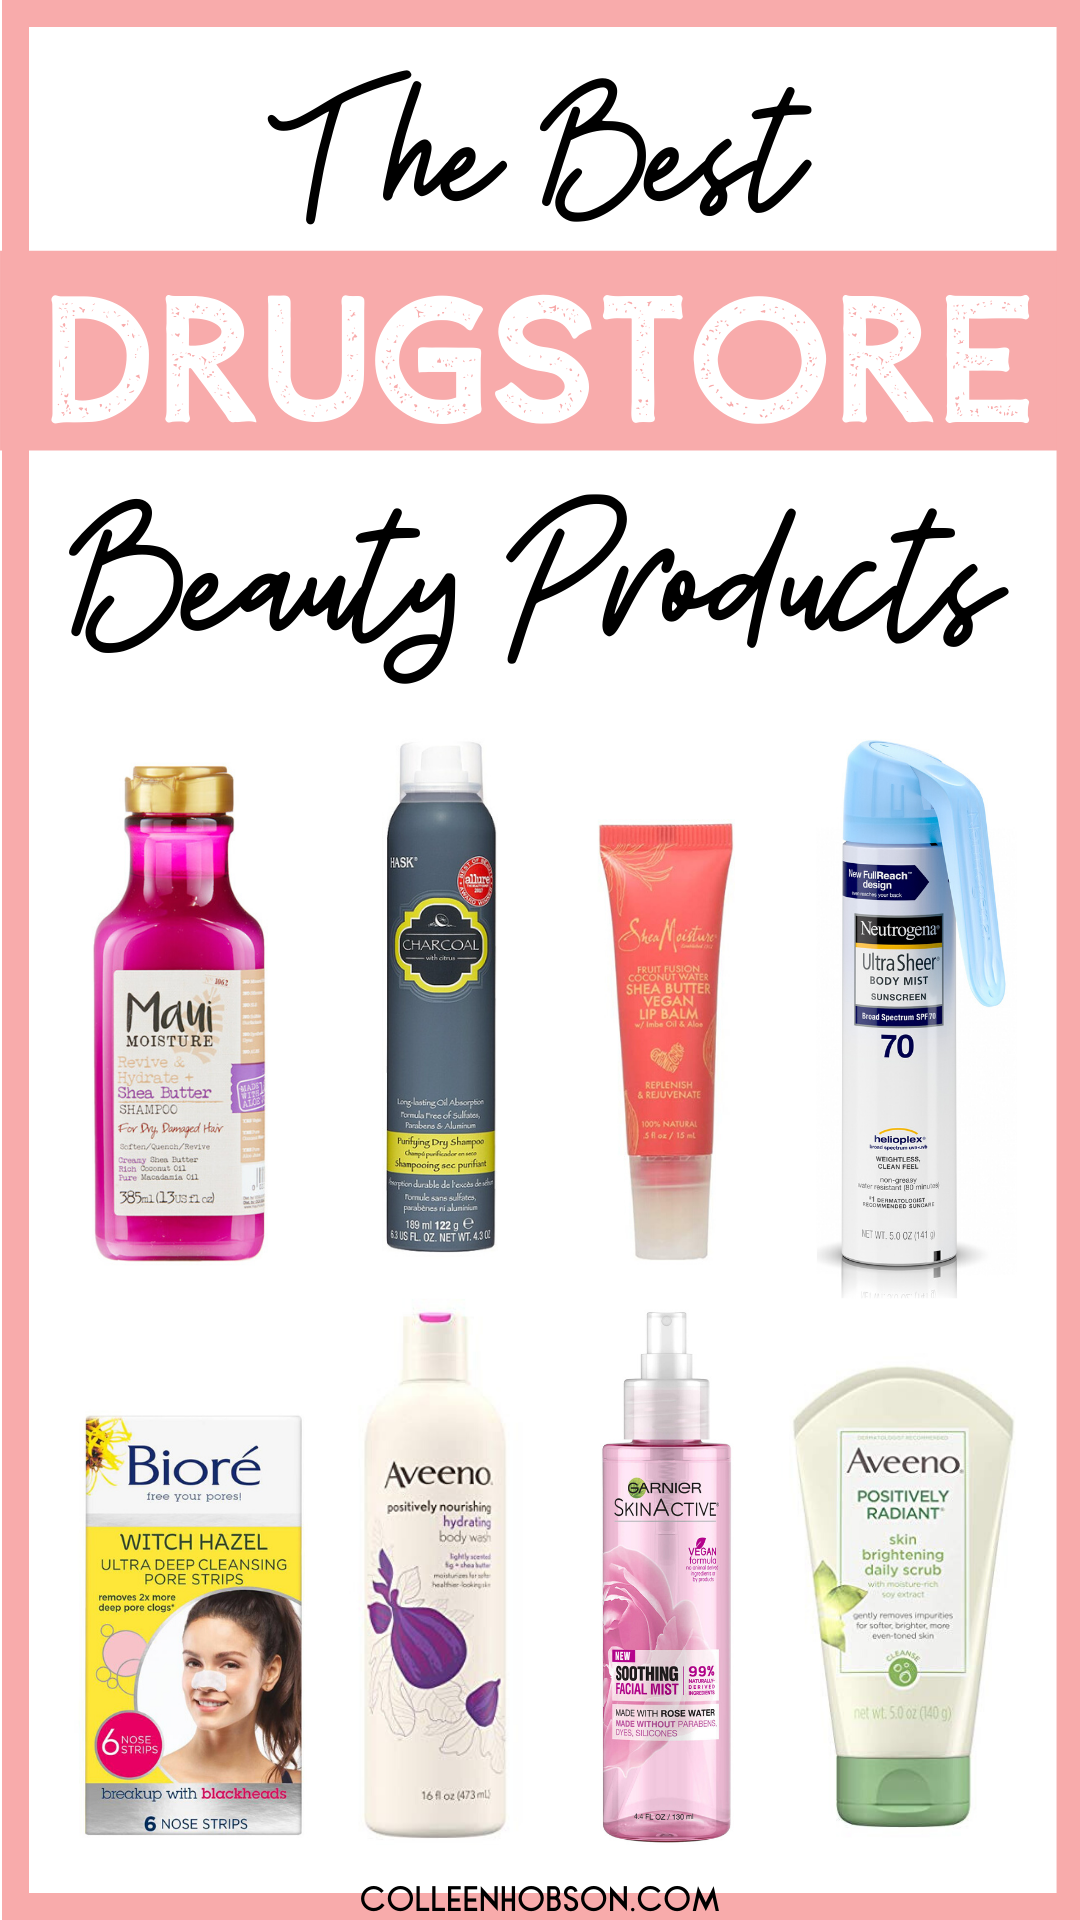 The Best Drugstore Beauty Products - The Best Drugstore Beauty Products -   18 beauty Products list ideas